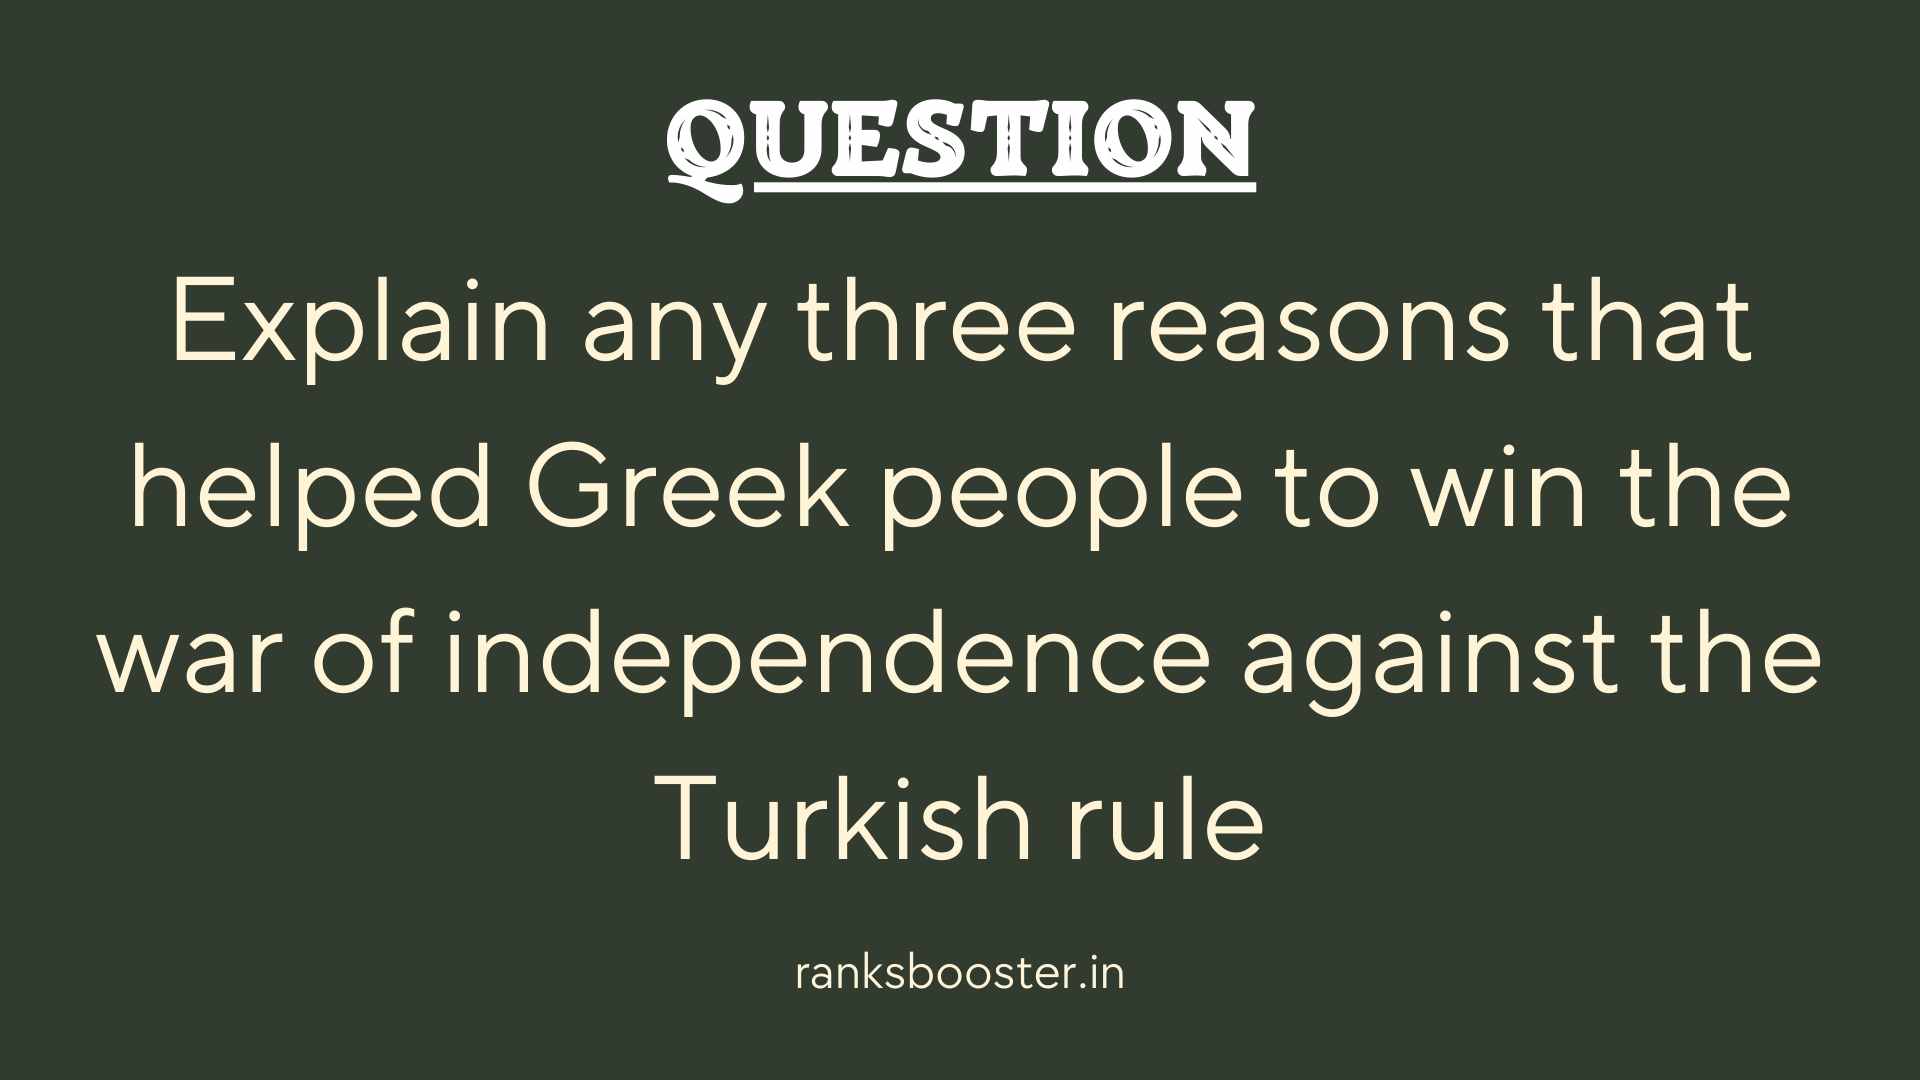 Question: Explain any three reasons that helped Greek people to win the war of independence against the Turkish rule